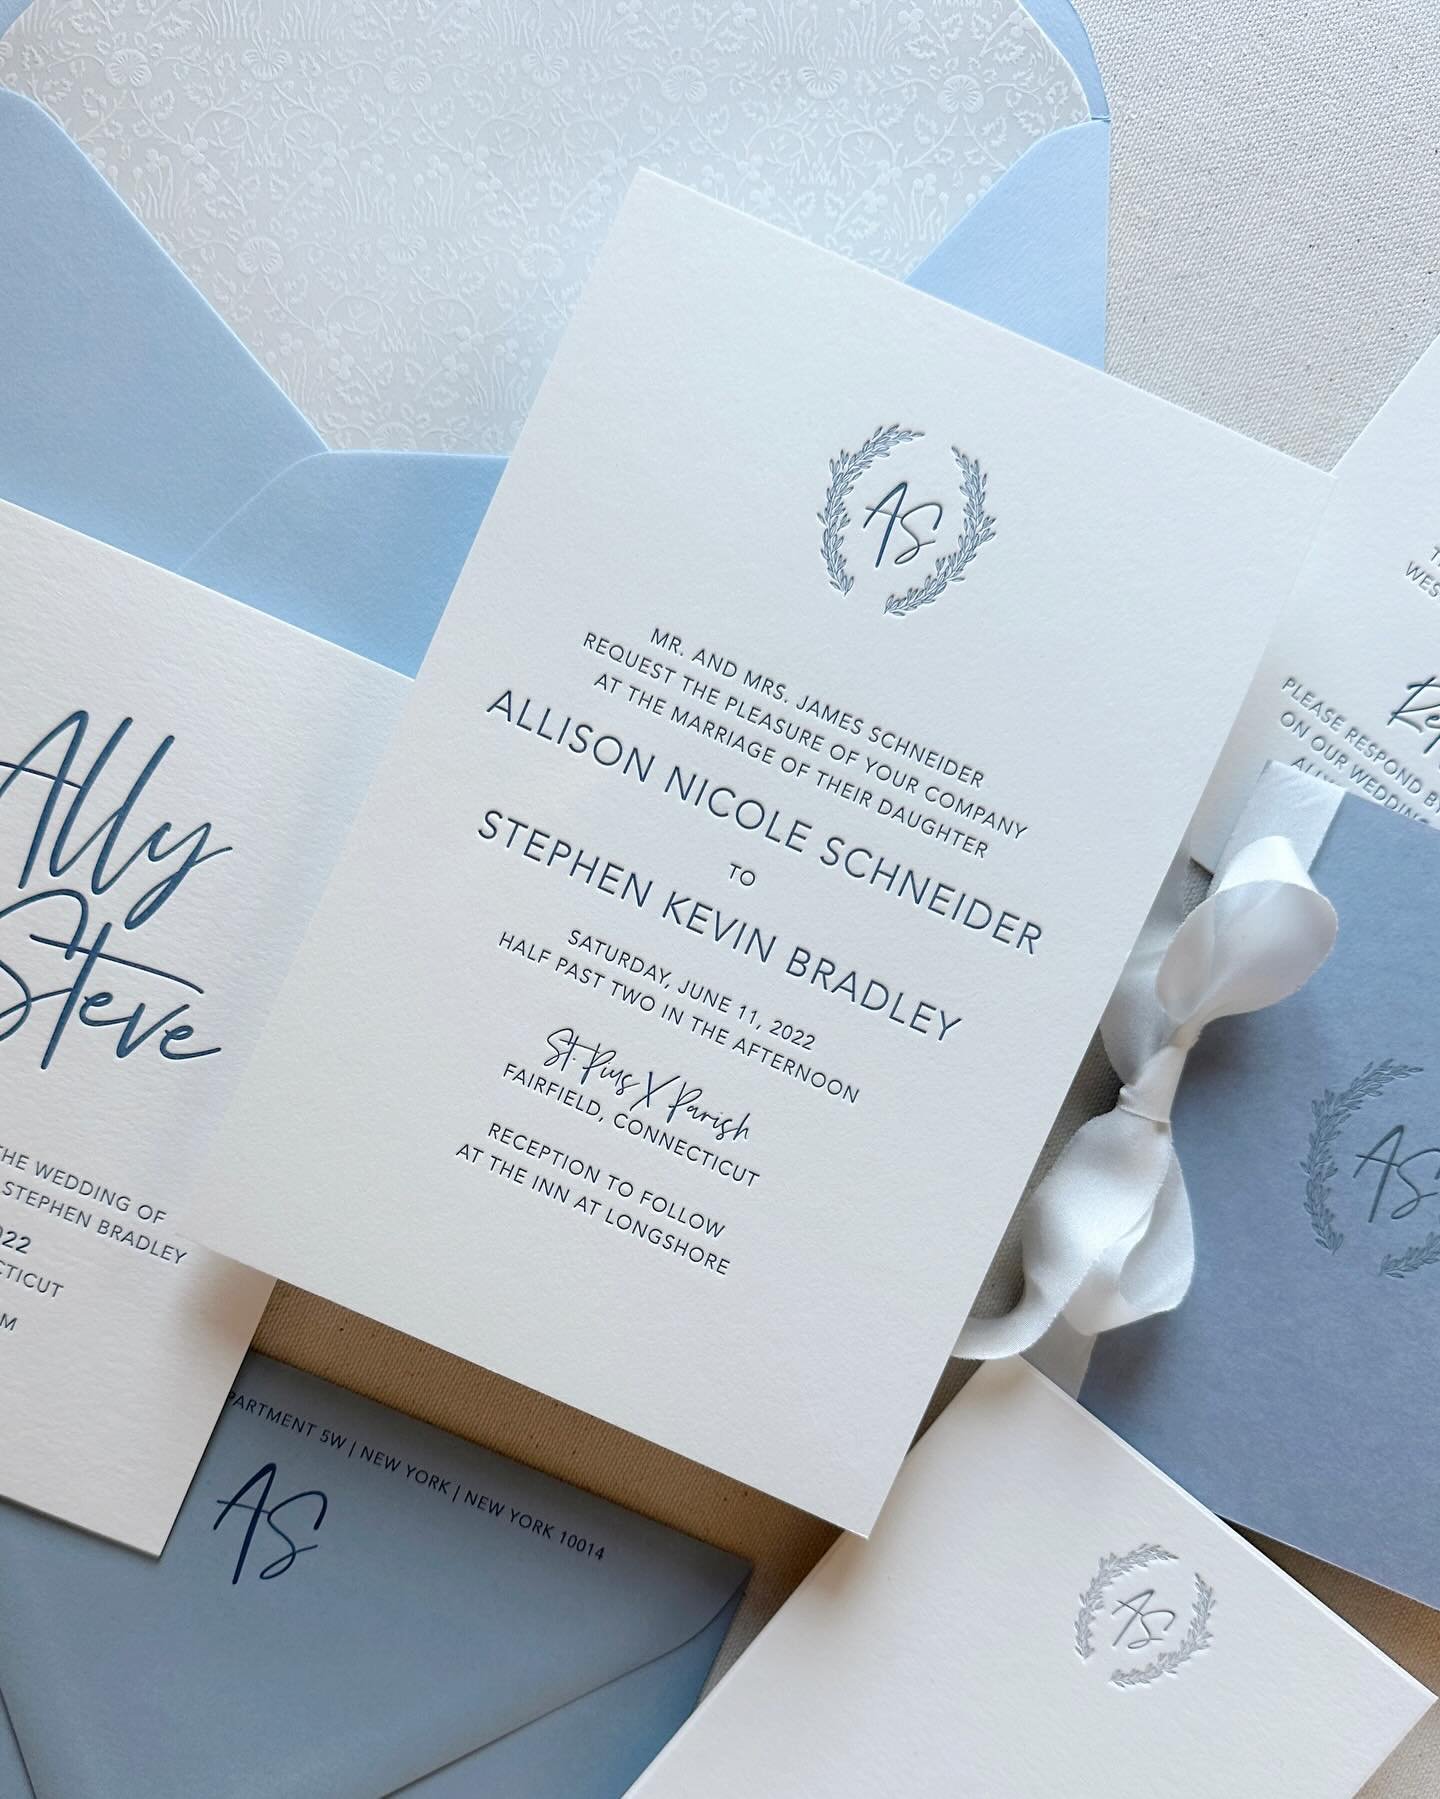 delicate details, a casual script, and baby blue accents fit the bill for this coastal connecticut wedding suite. 
&bull;
&bull;
&bull;
#weddinginvitations #custominvitations #connecticutwedding #coastal #letterpresslove #letterpresspattern